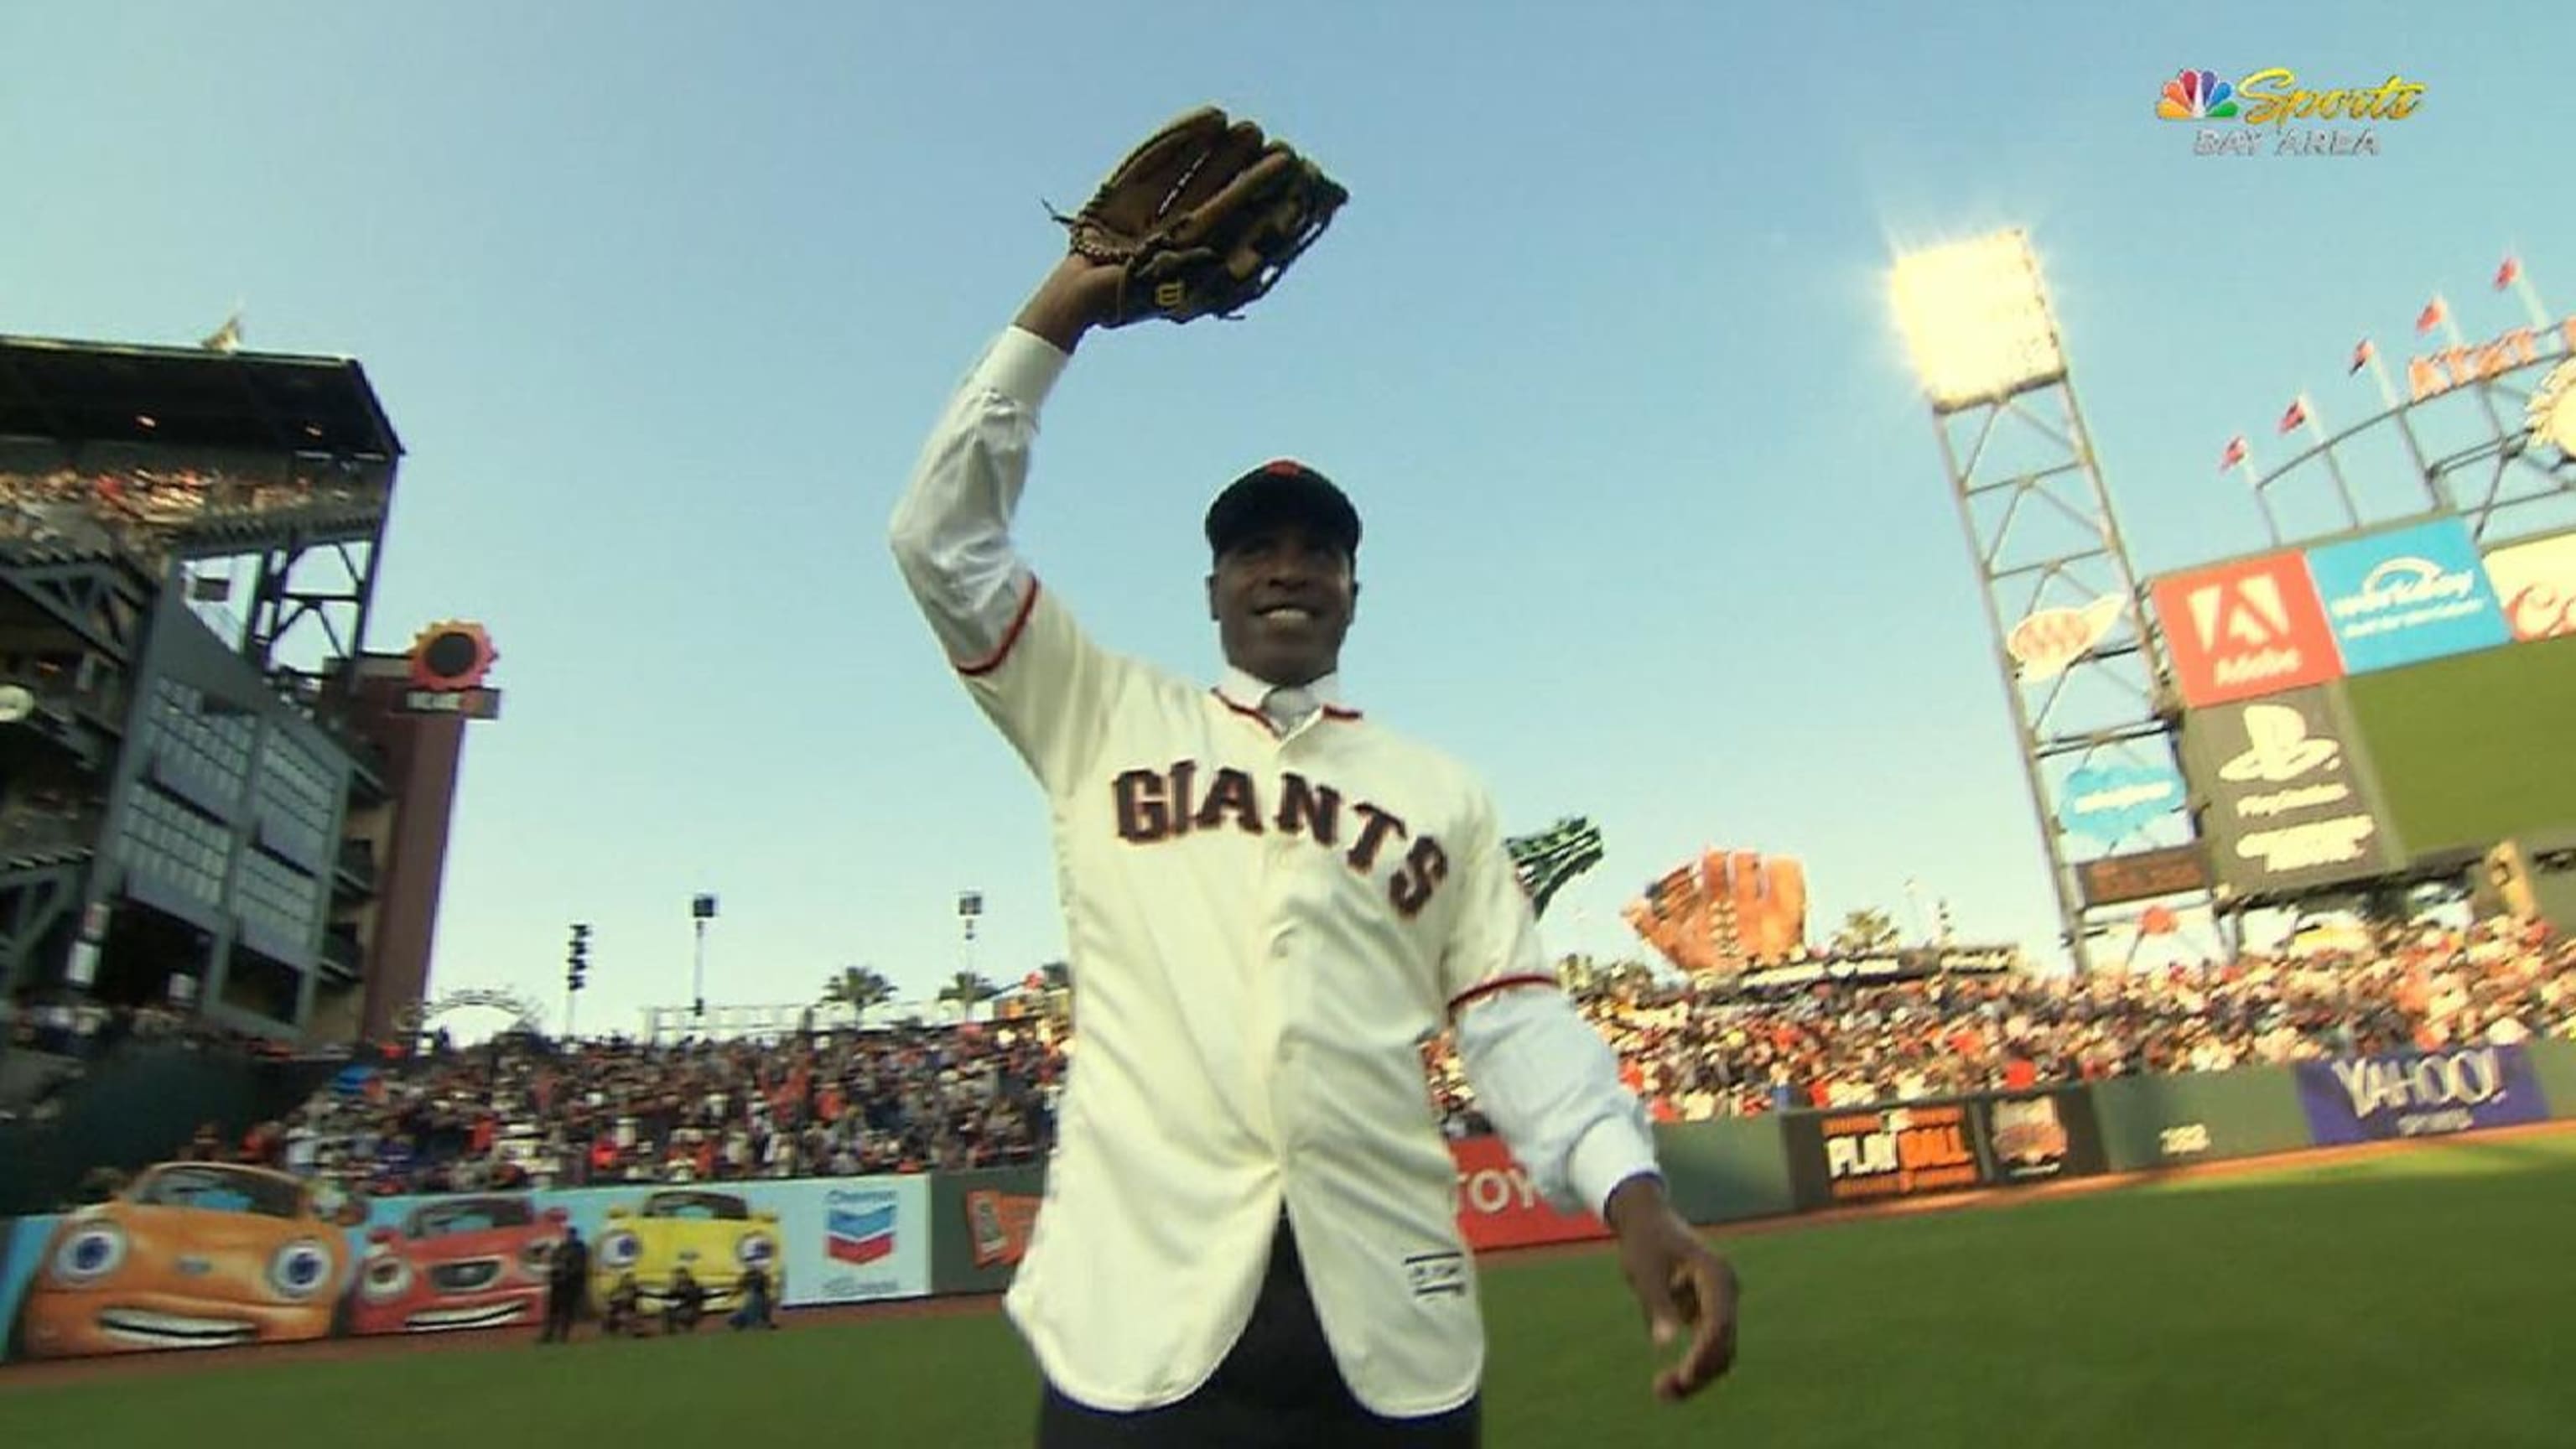 Barry Bonds gets No. 25 jersey retired by Giants